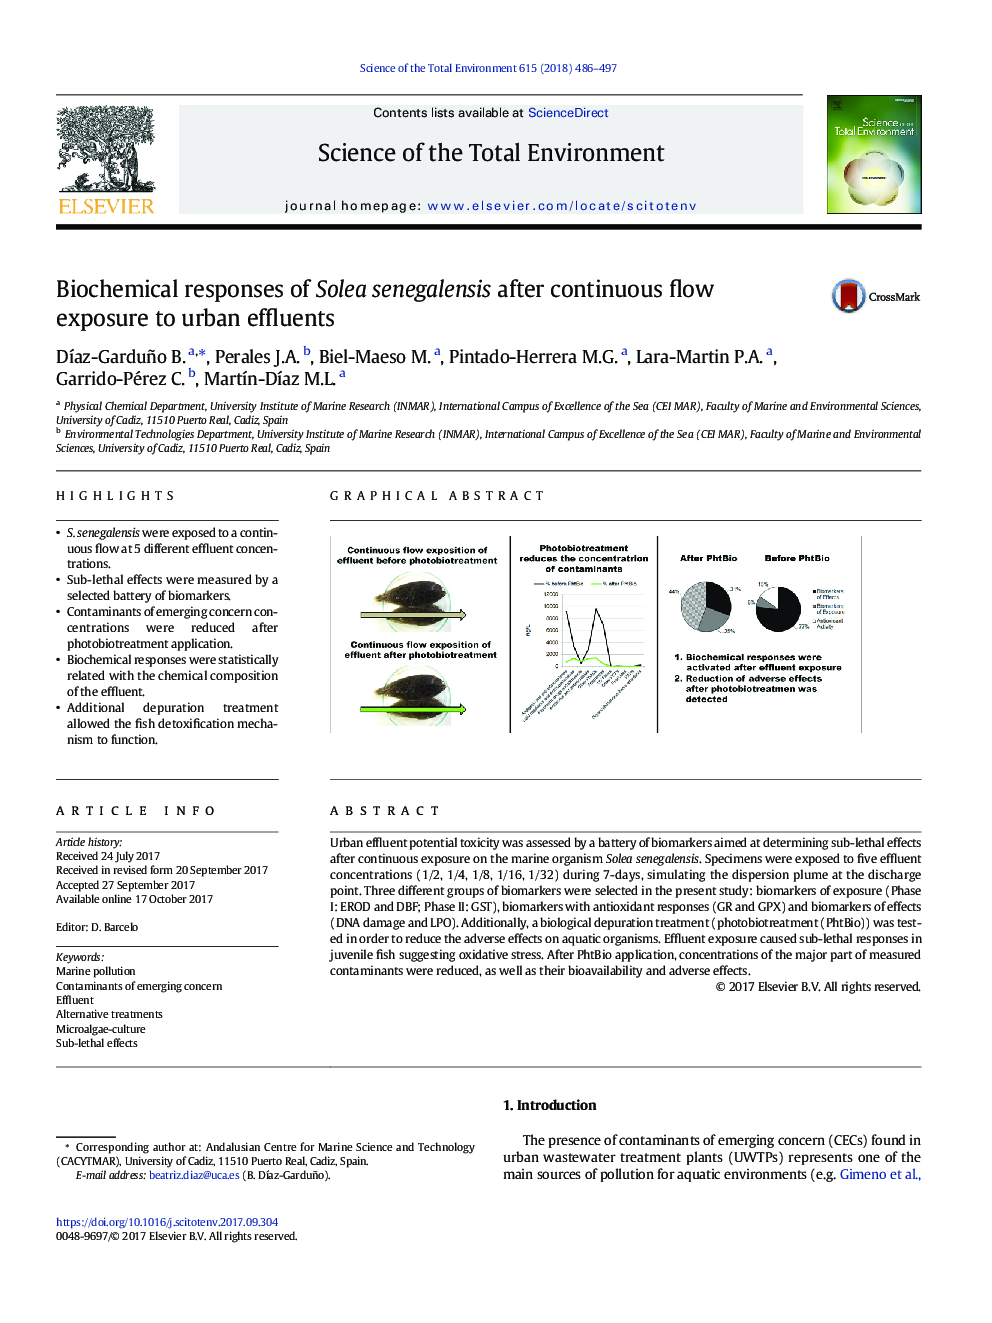 Biochemical responses of Solea senegalensis after continuous flow exposure to urban effluents